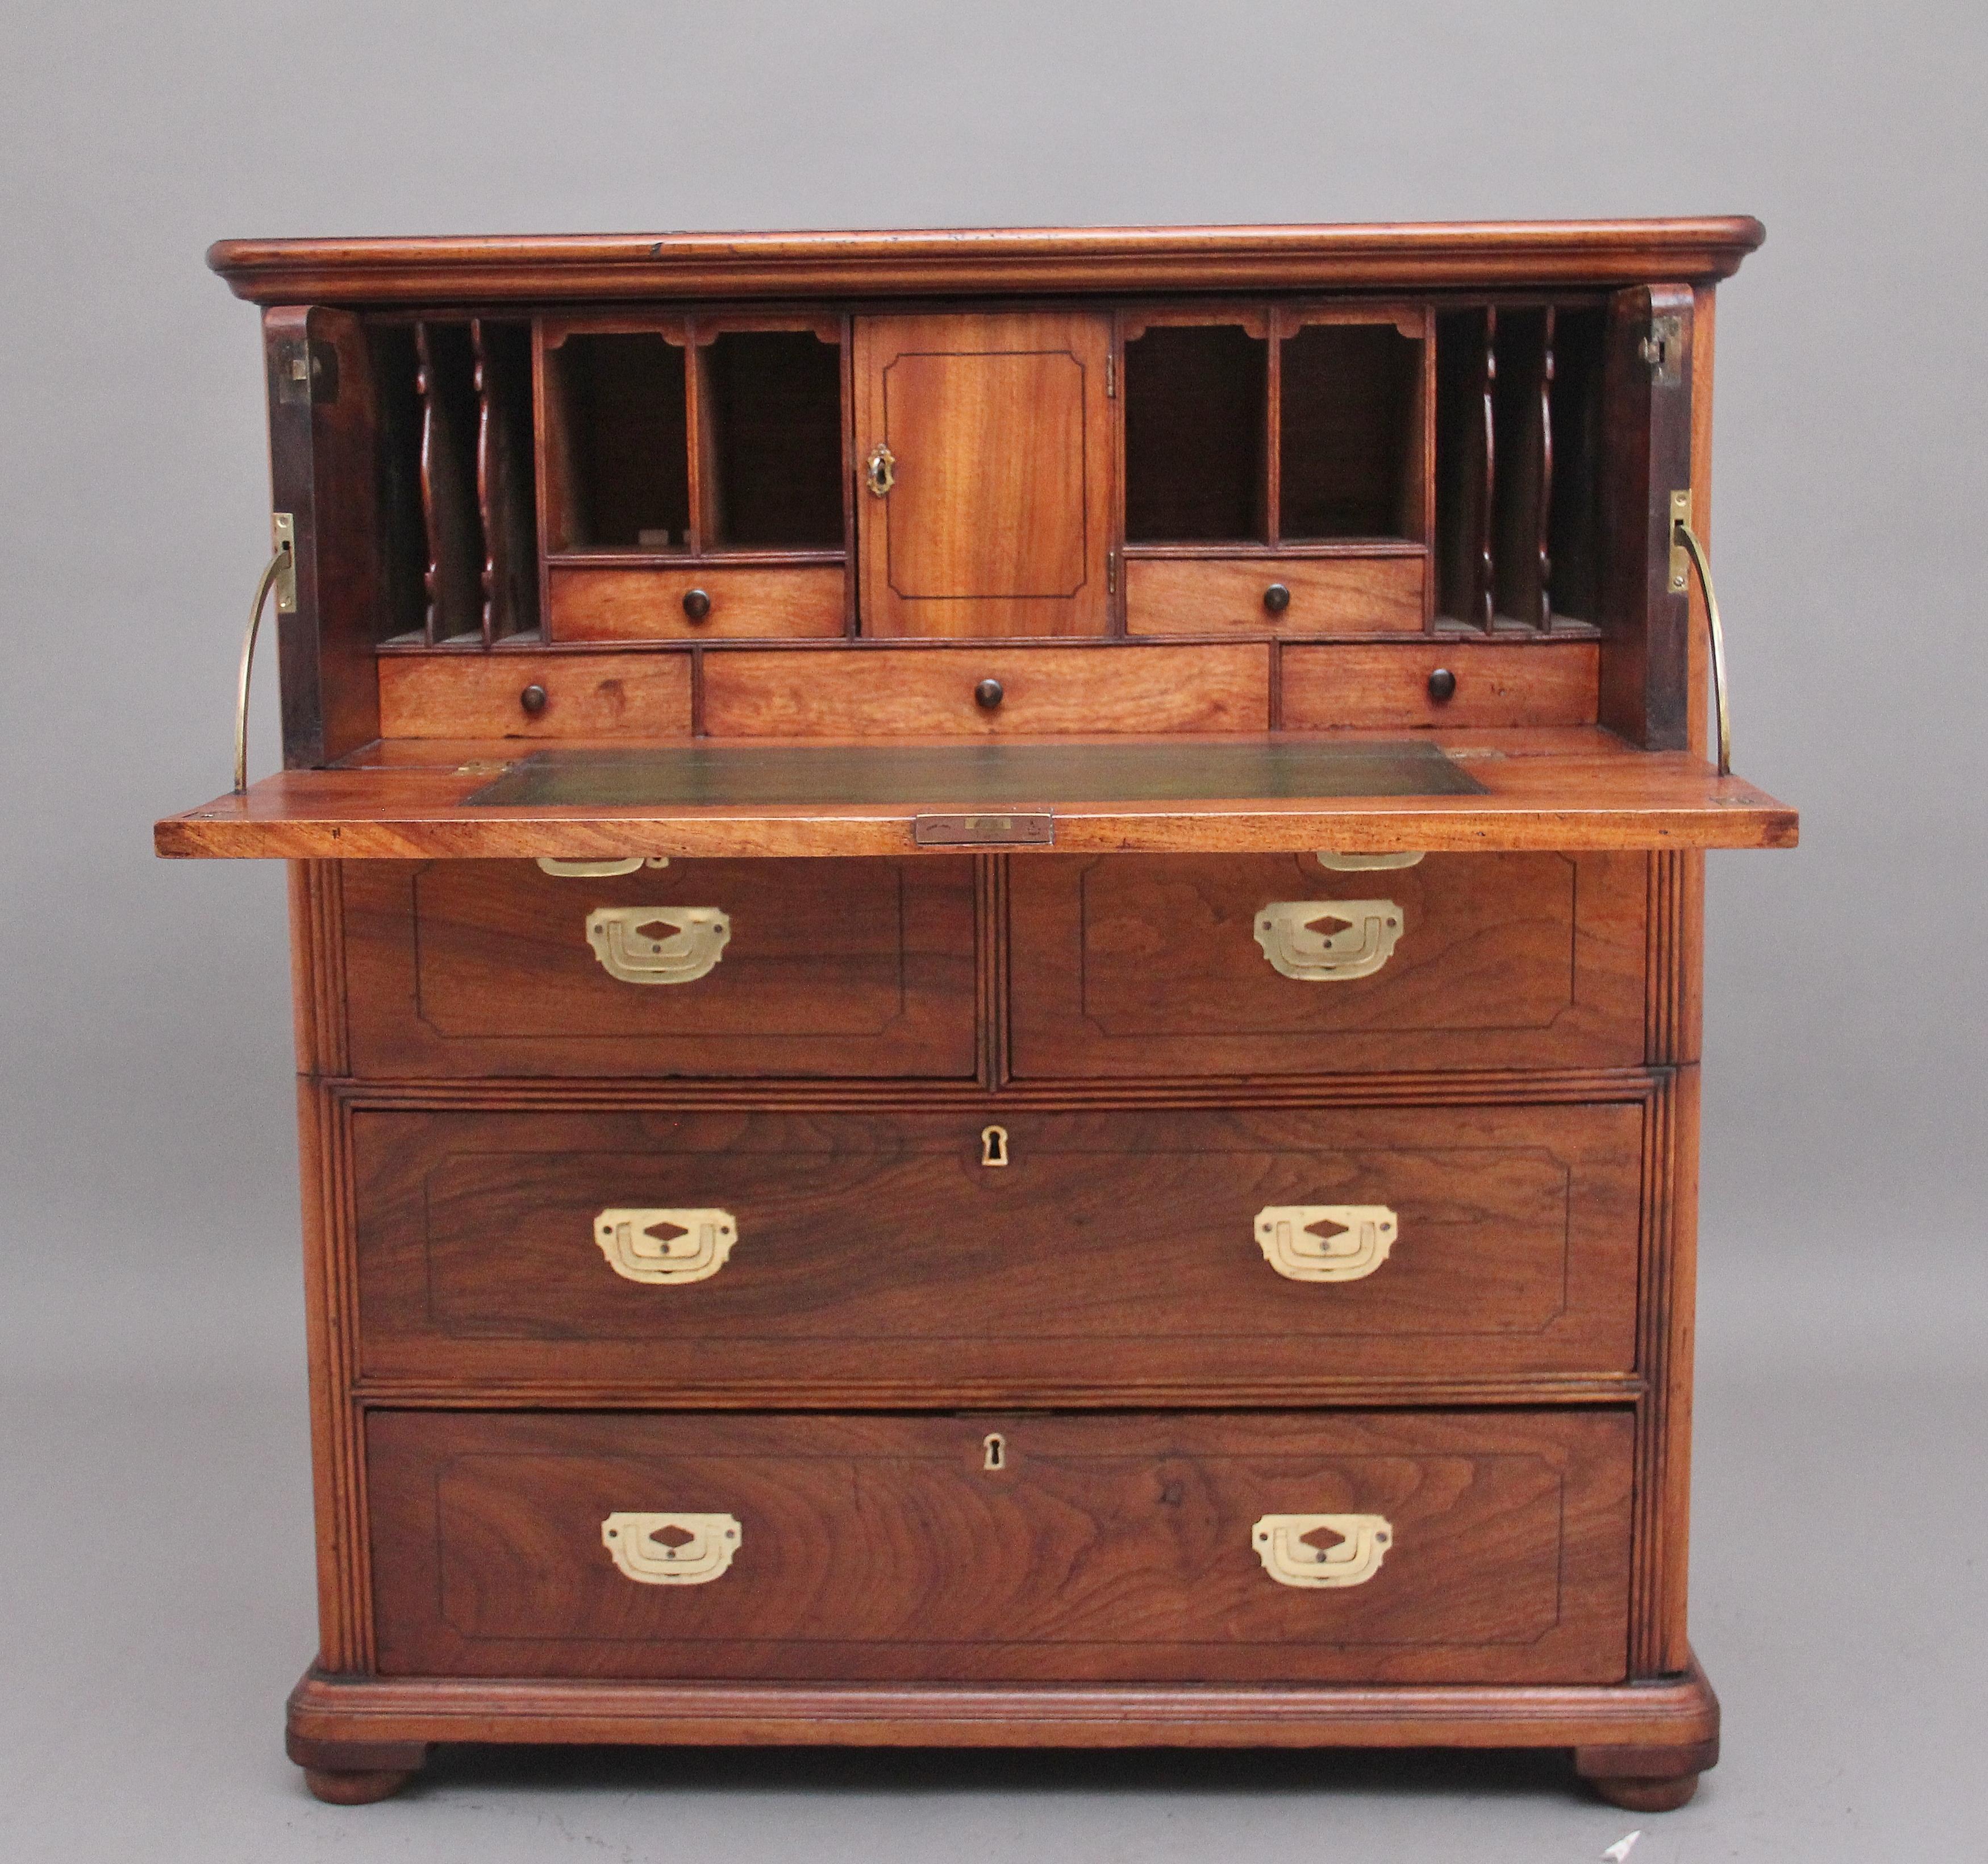 Hardwood Early 19th Century Anglo-Indian Campaign Chest